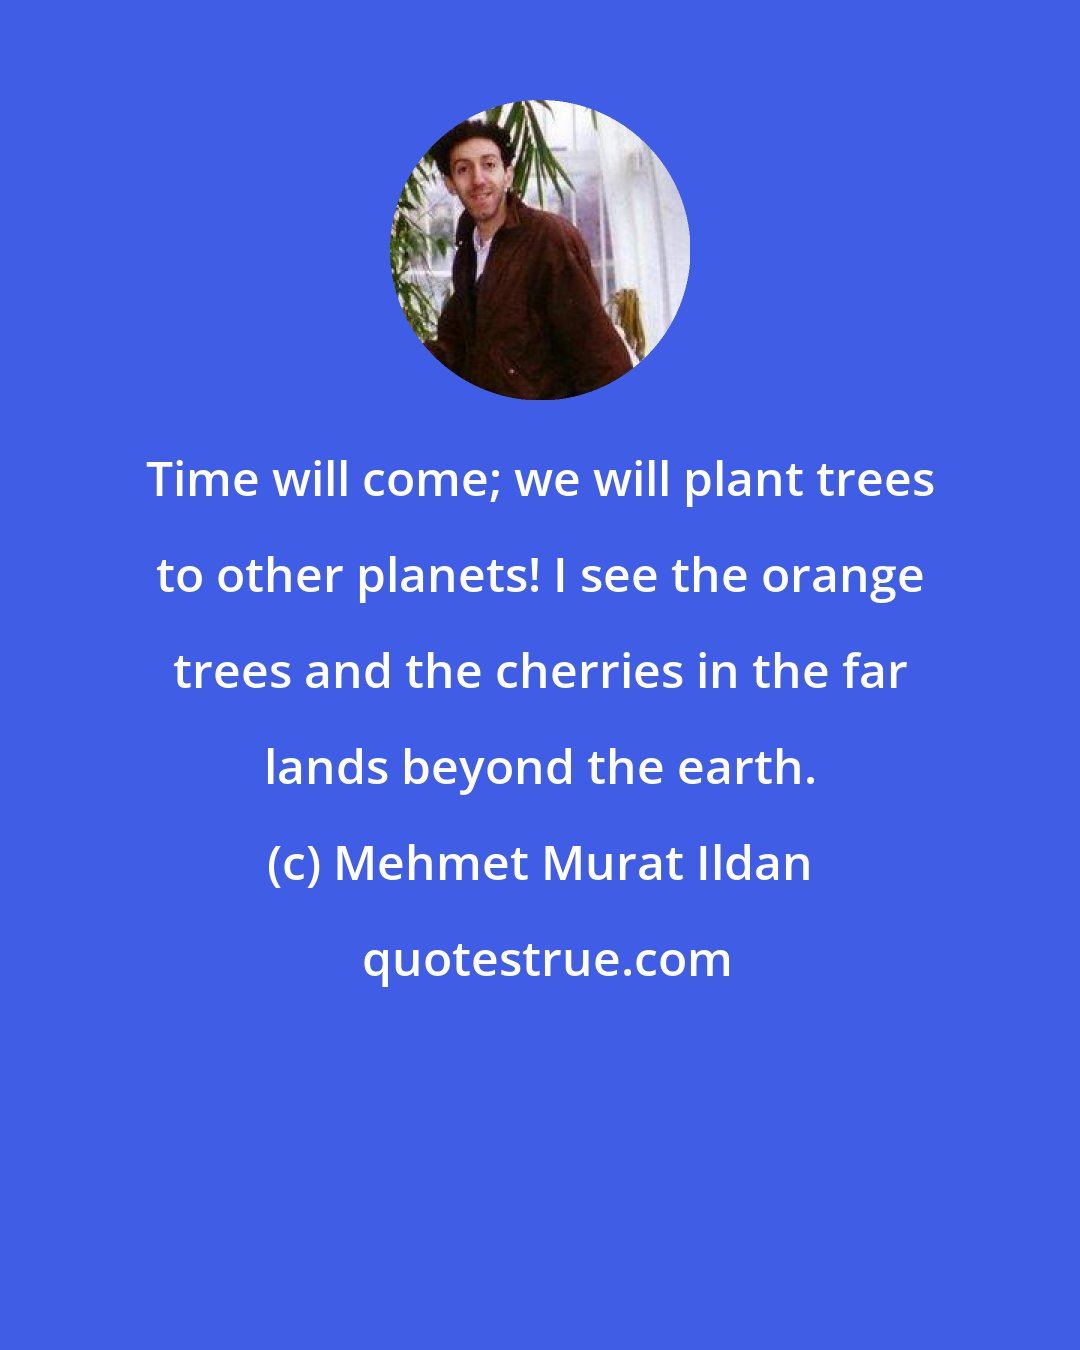 Mehmet Murat Ildan: Time will come; we will plant trees to other planets! I see the orange trees and the cherries in the far lands beyond the earth.